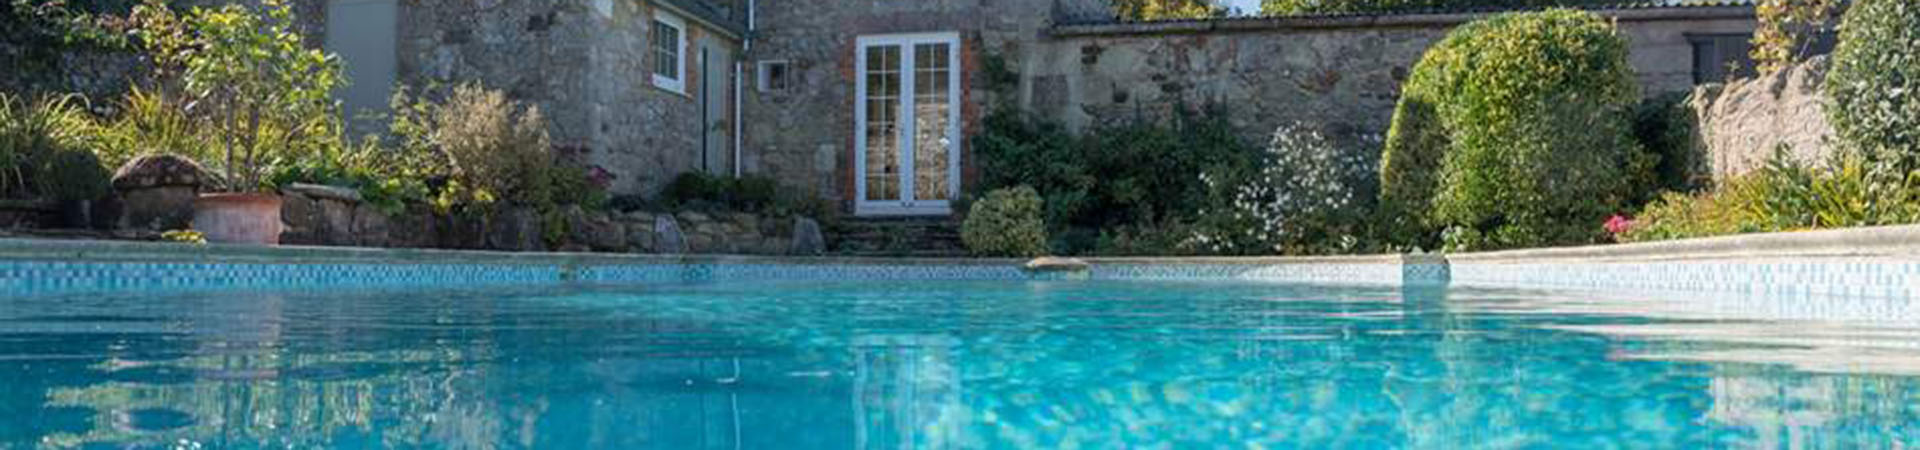 Holiday cottages with pools in Northumberland